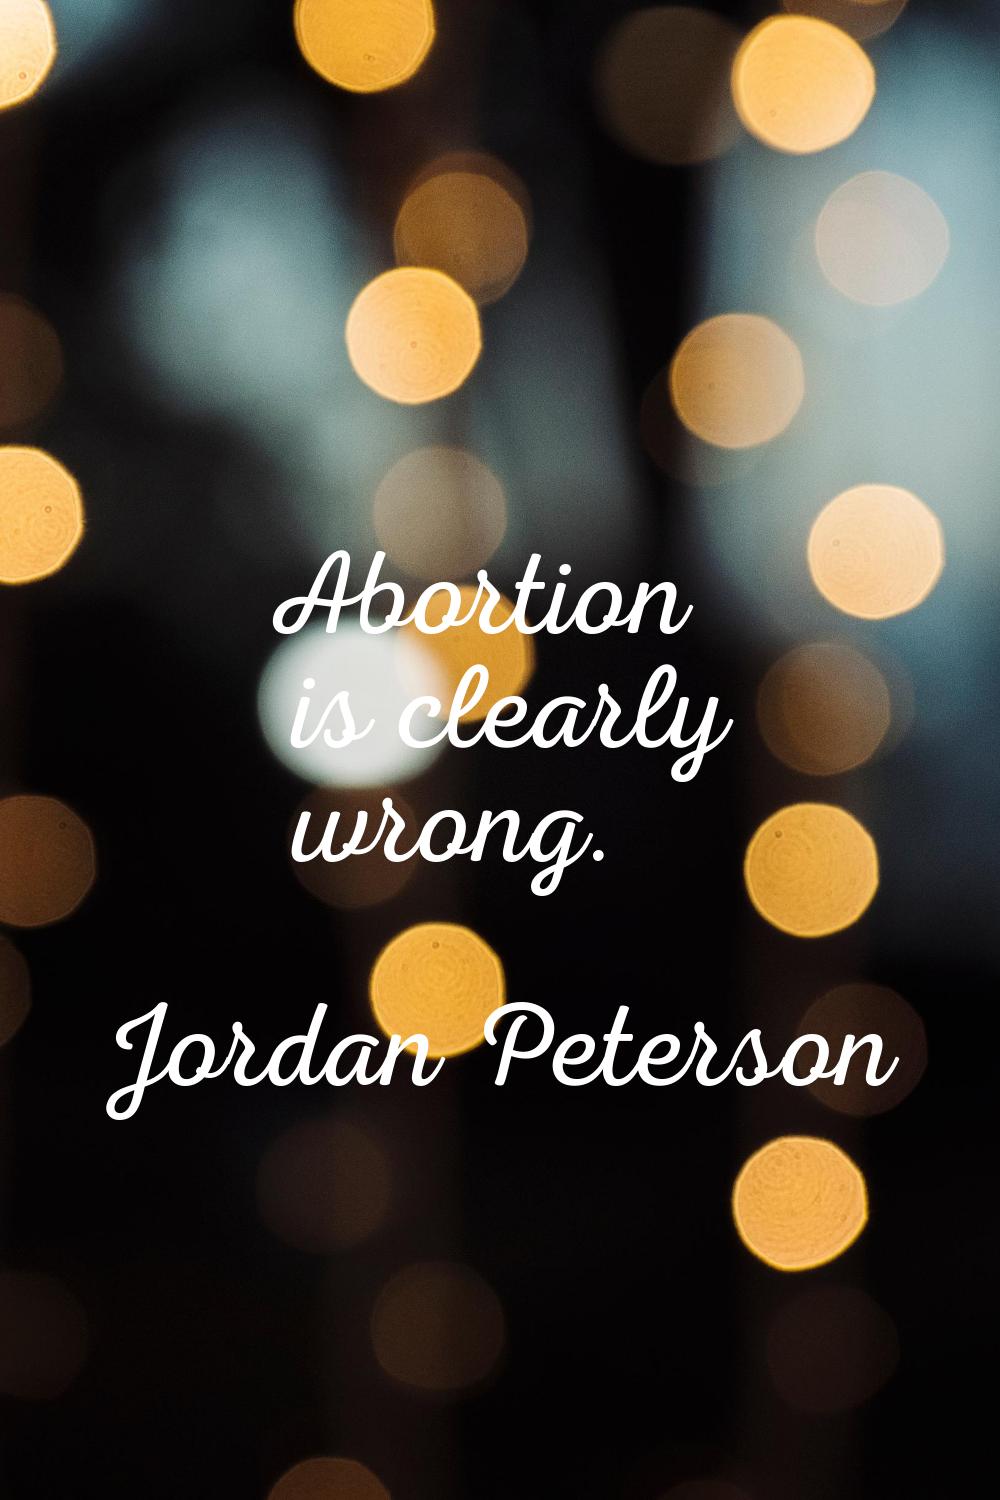 Abortion is clearly wrong.